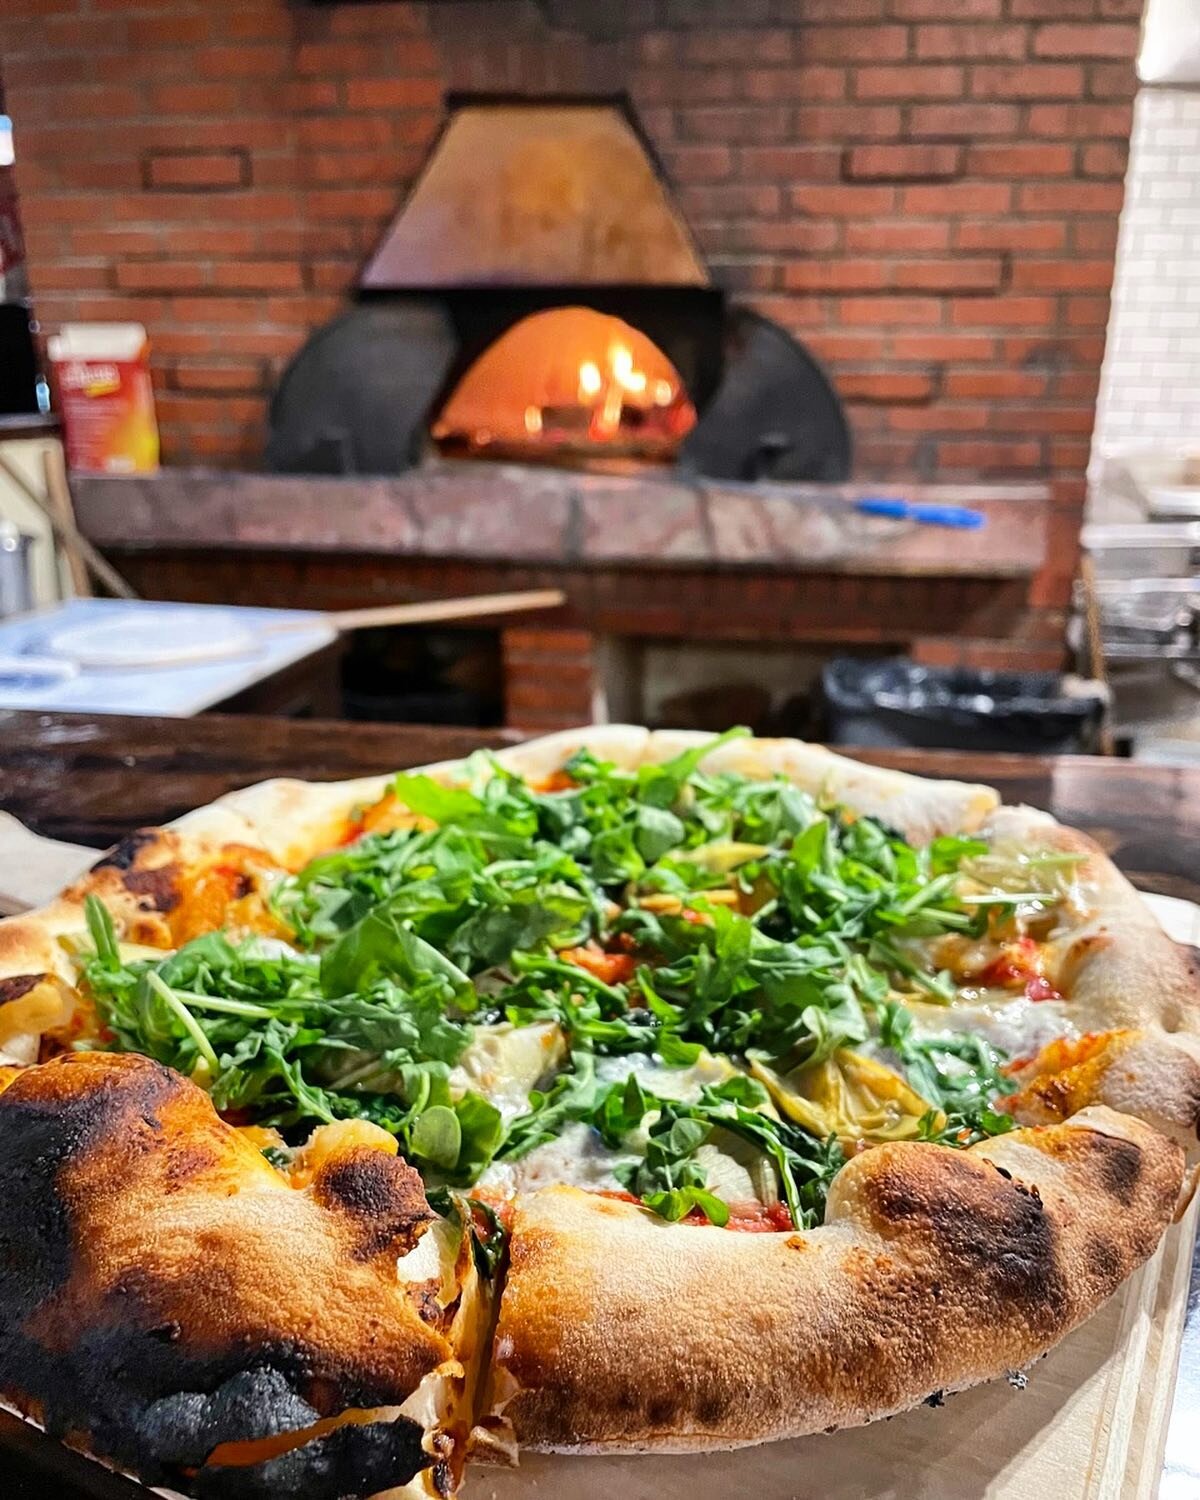 It&rsquo;s Pies &amp; Pints Wednesday!!! (1/2 off select Pizzas &amp; $5 Drafts from 4-7pm) 🍕😱
.
.
.
#cinkuni #northparksandiego #northparksd #30thstreet #japanesefusion #margherita #pepperonipizza #teriyakichicken #italianfood #pizza #woodfired #p